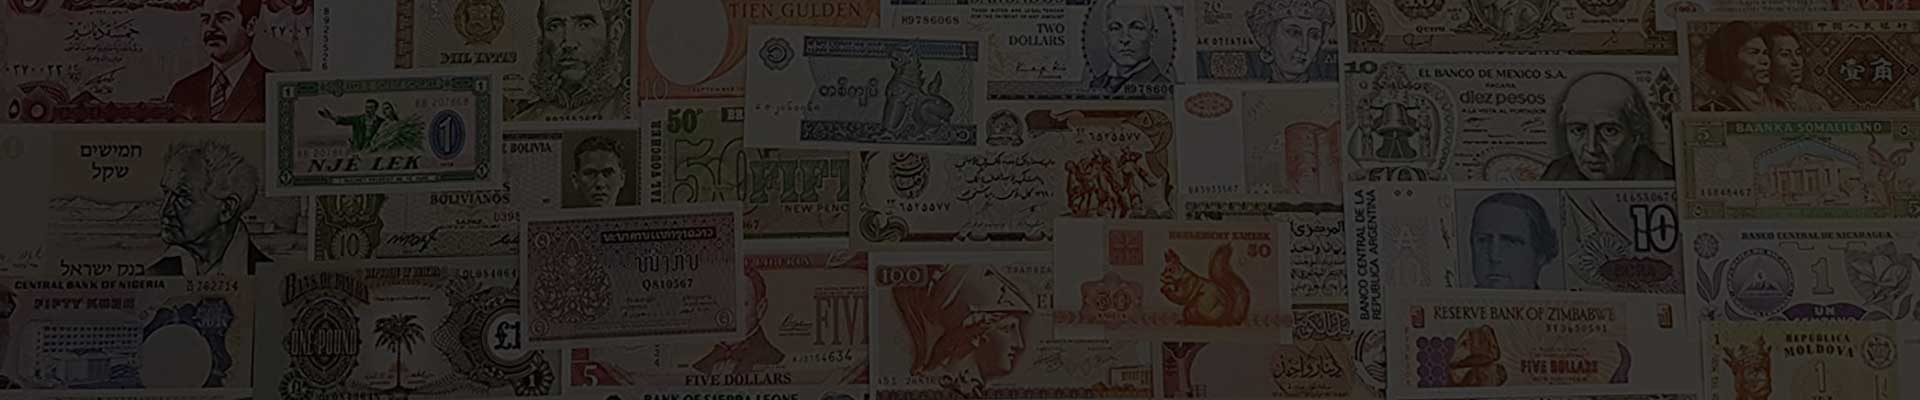 20,000 Banknote Gallery Images: A Monumental Milestone